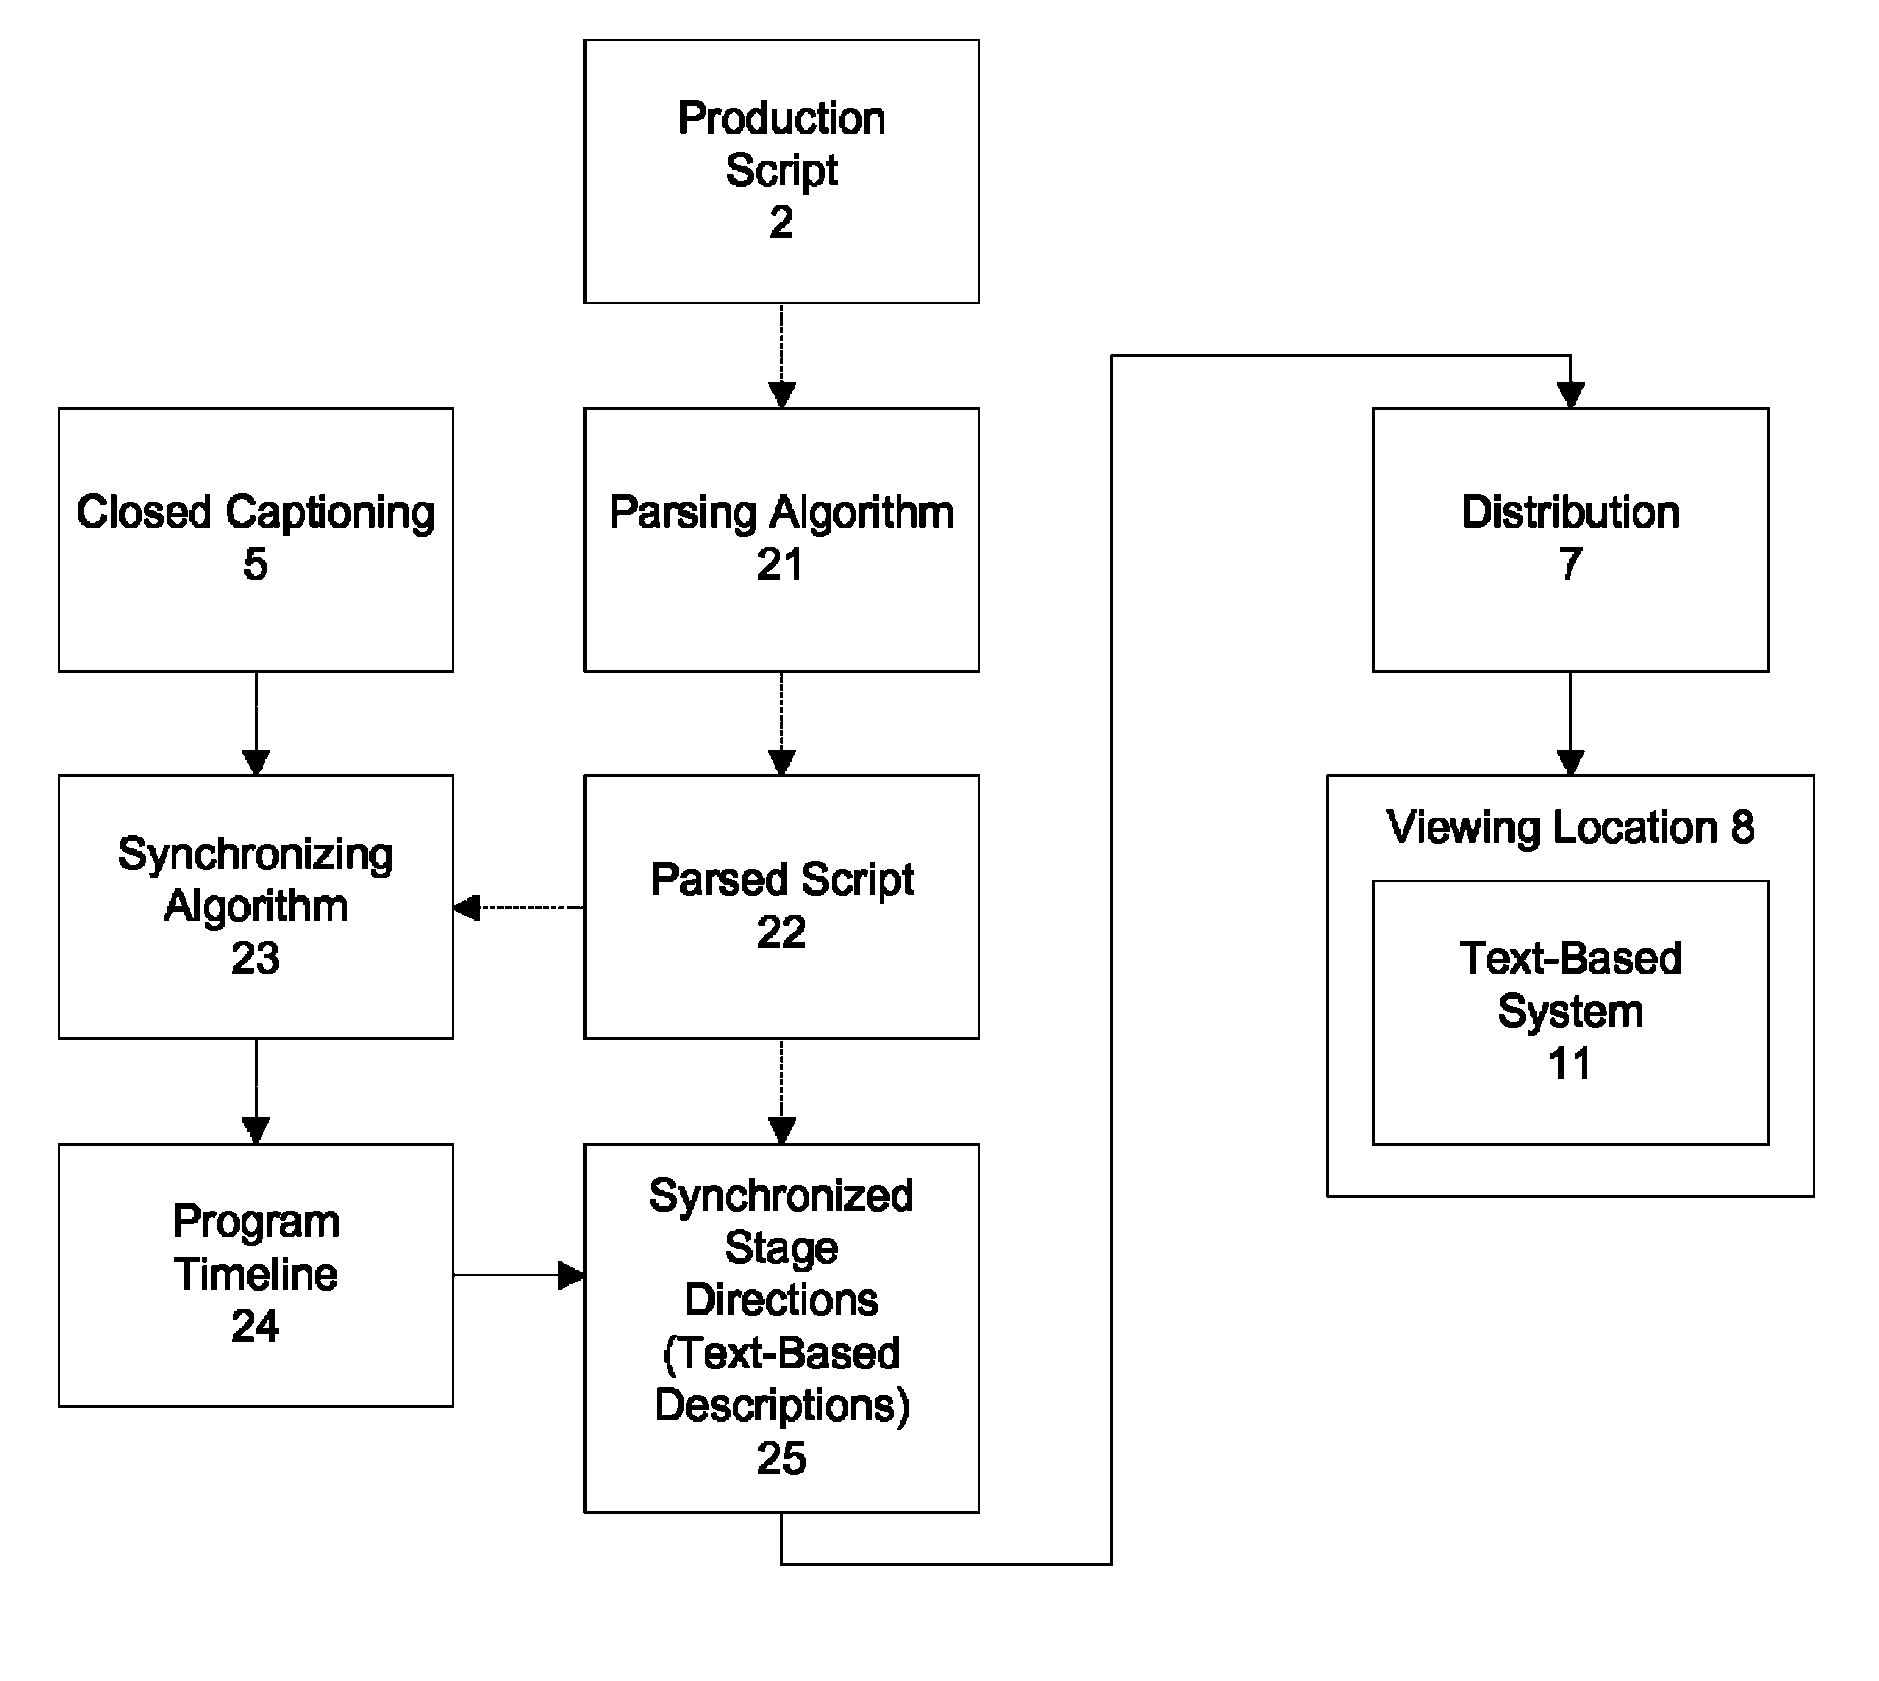 Method and process for text-based assistive program descriptions for television